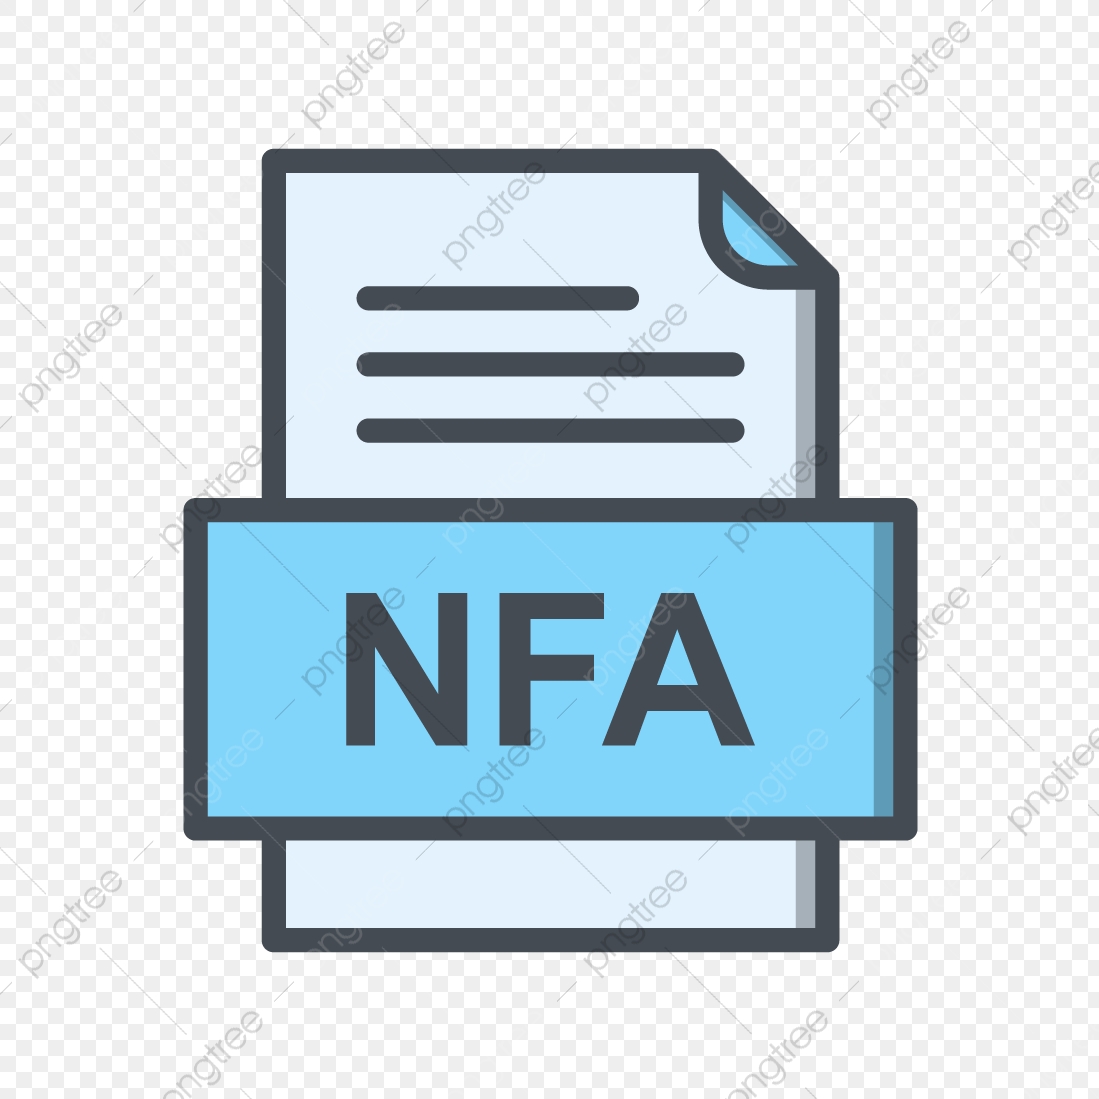 Nfa File Document Icon, Nfa, Document, File PNG and Vector.